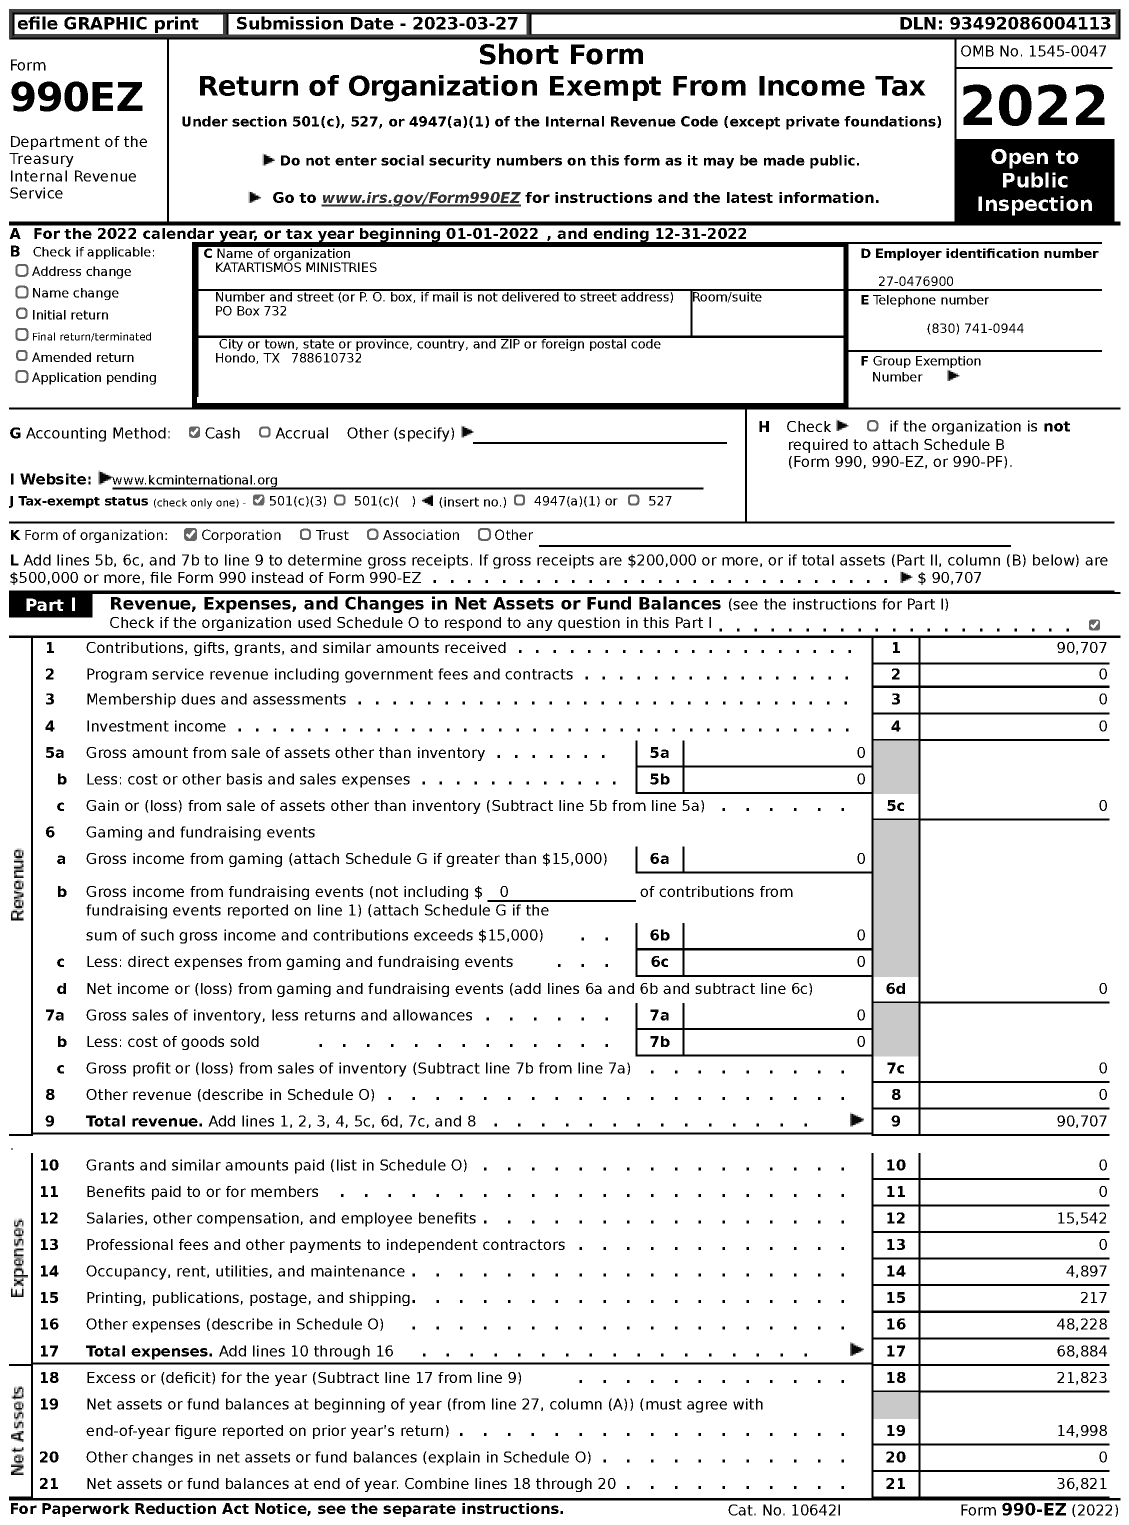 Image of first page of 2022 Form 990EZ for Katartismos Ministries